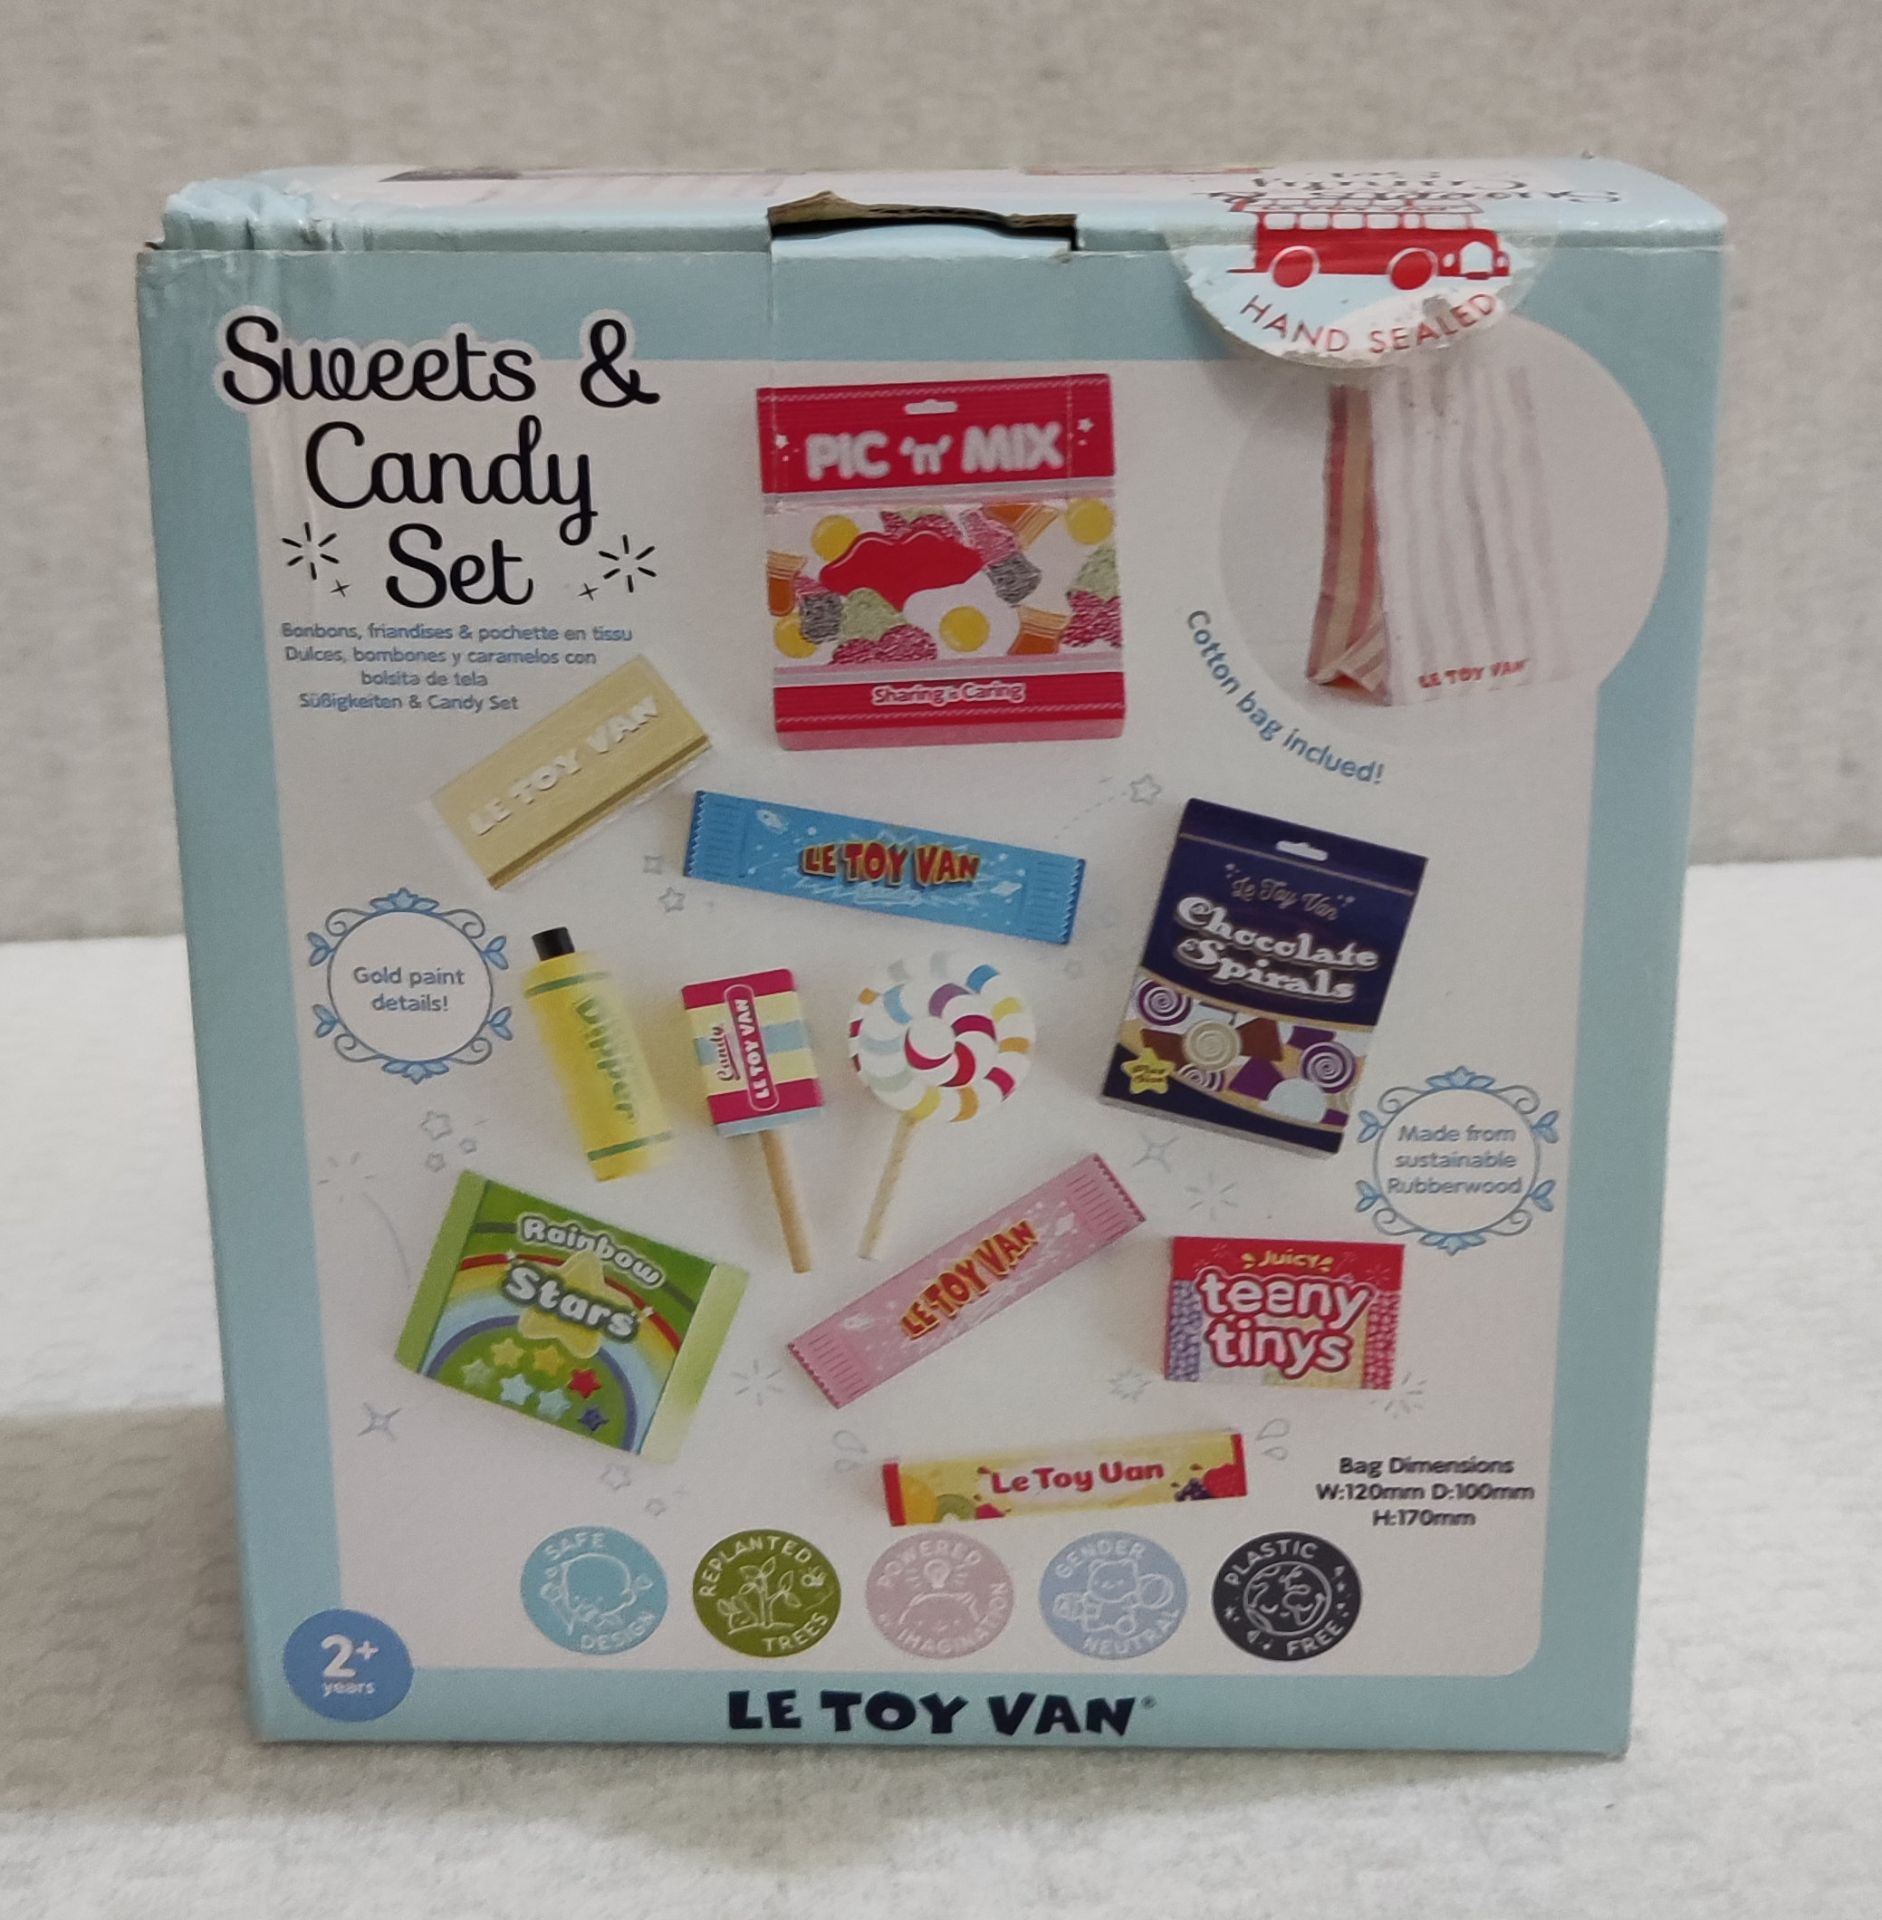 1 x Le Toy Van Honeybake Wooden Sweets & Candy Set - New/Boxed - Image 2 of 4